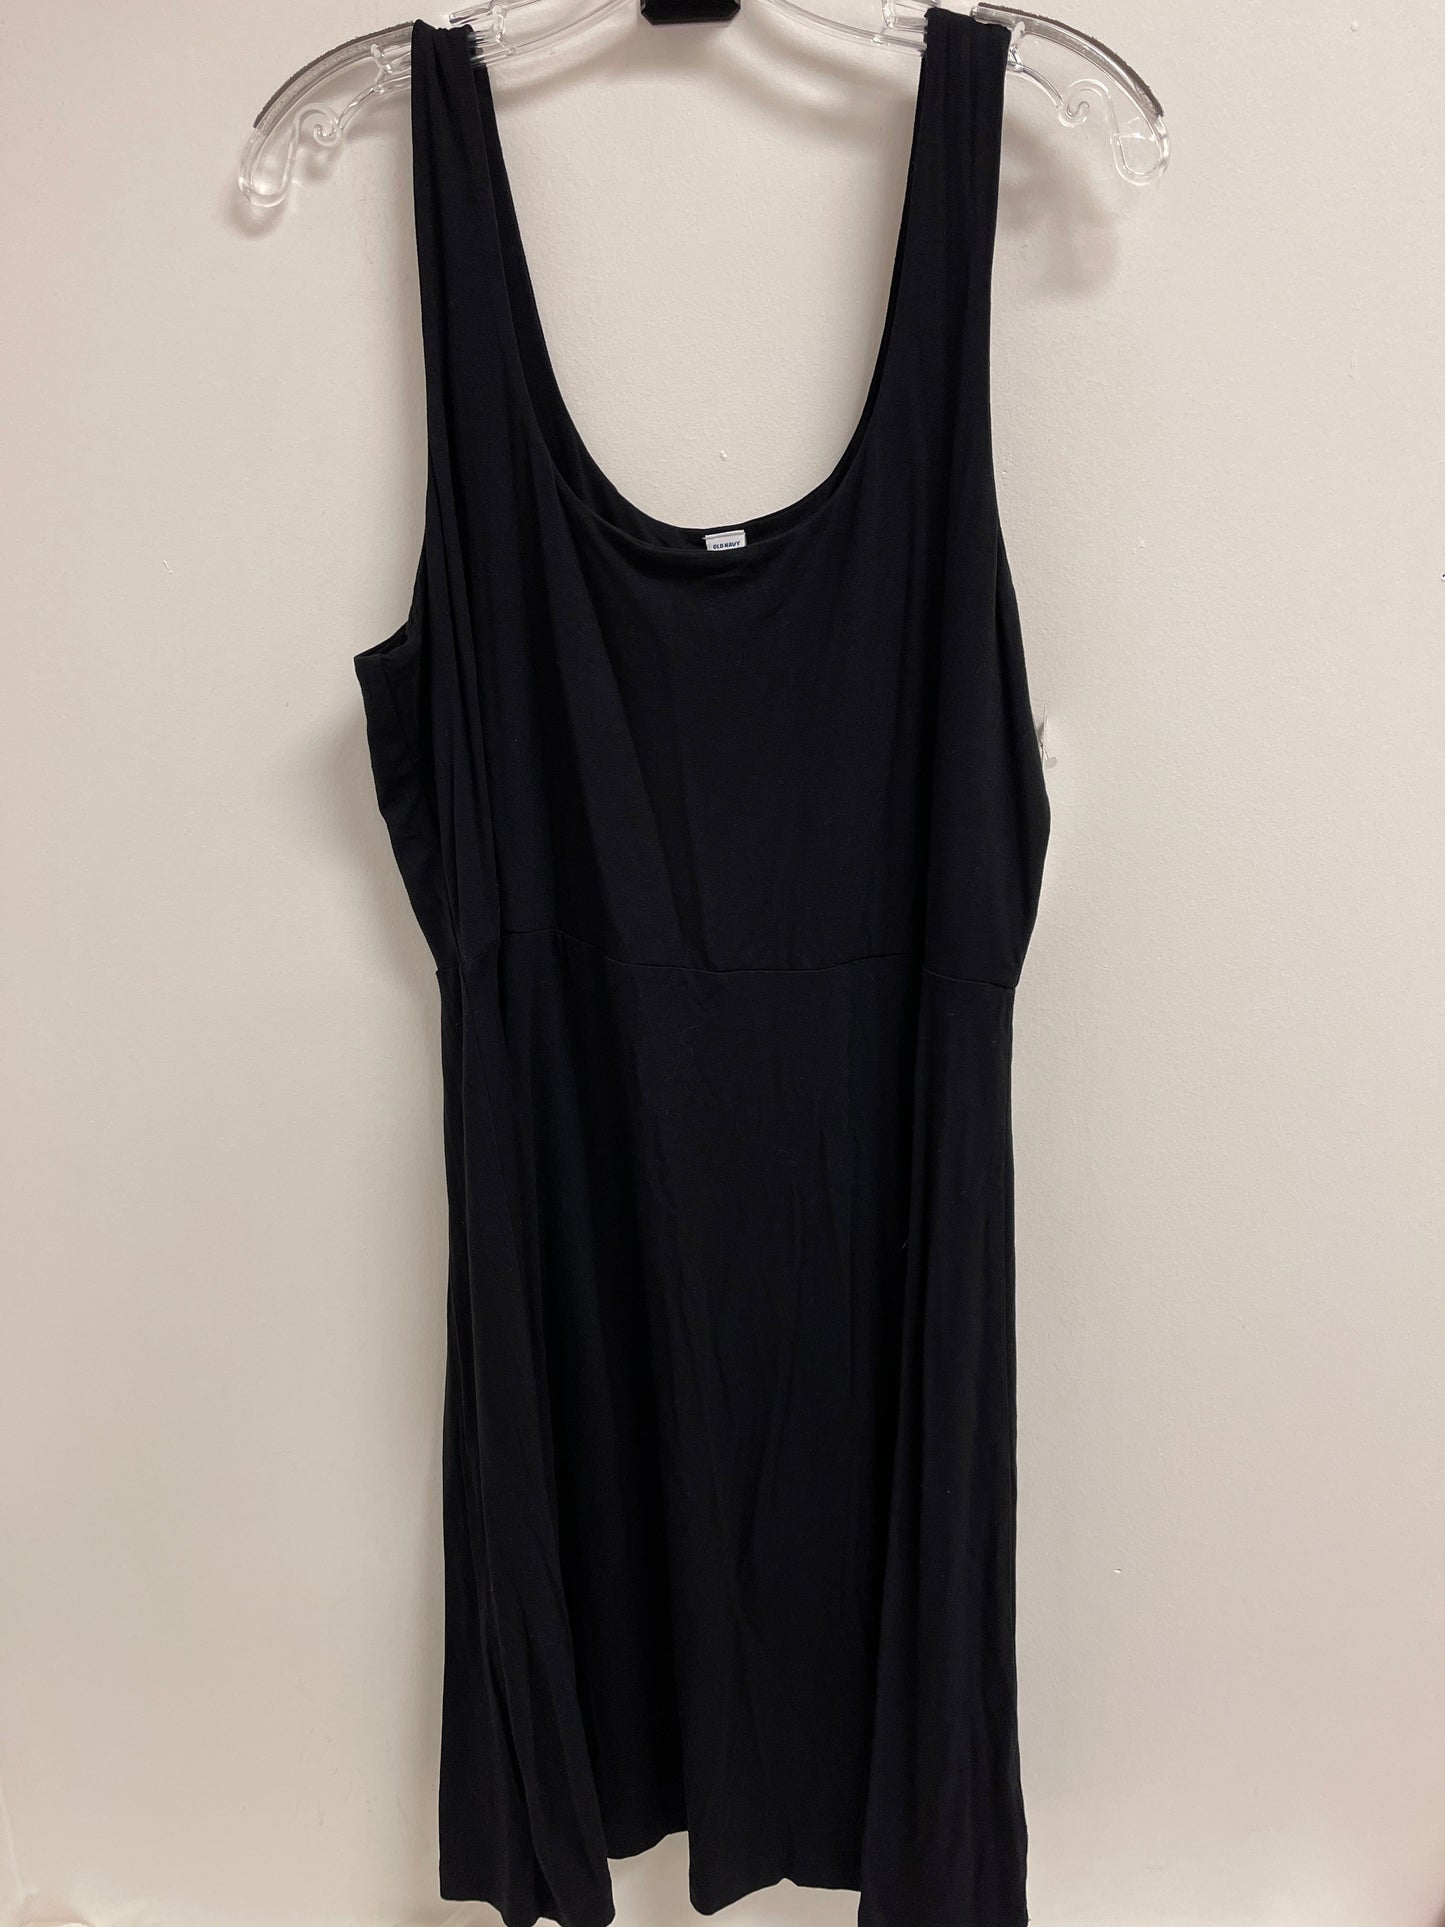 Black Dress Casual Short Old Navy, Size Xl